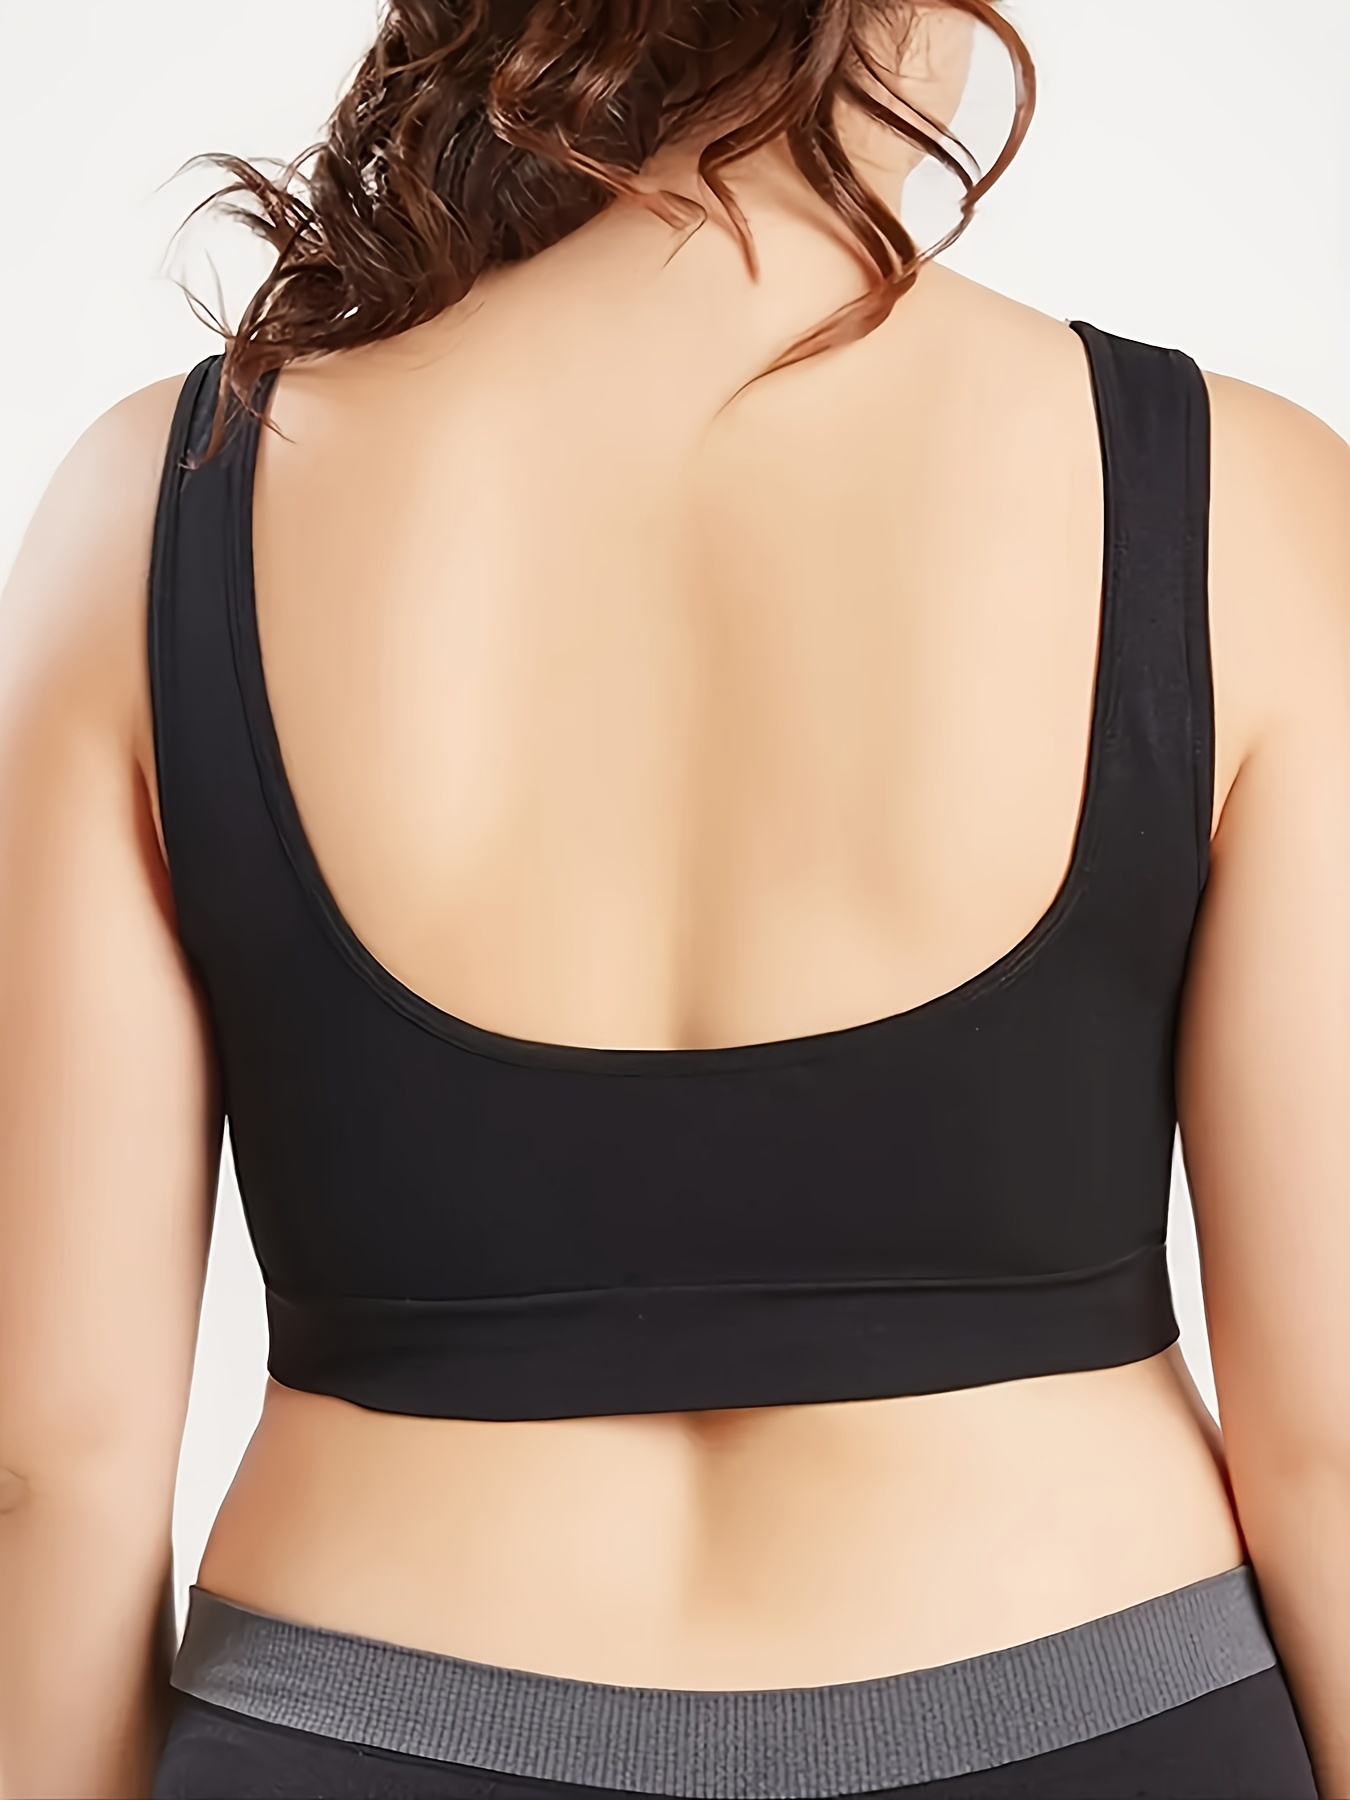 3 Pack Plus Size Sports Bra Set Women's Plus Ruched Seamless Full